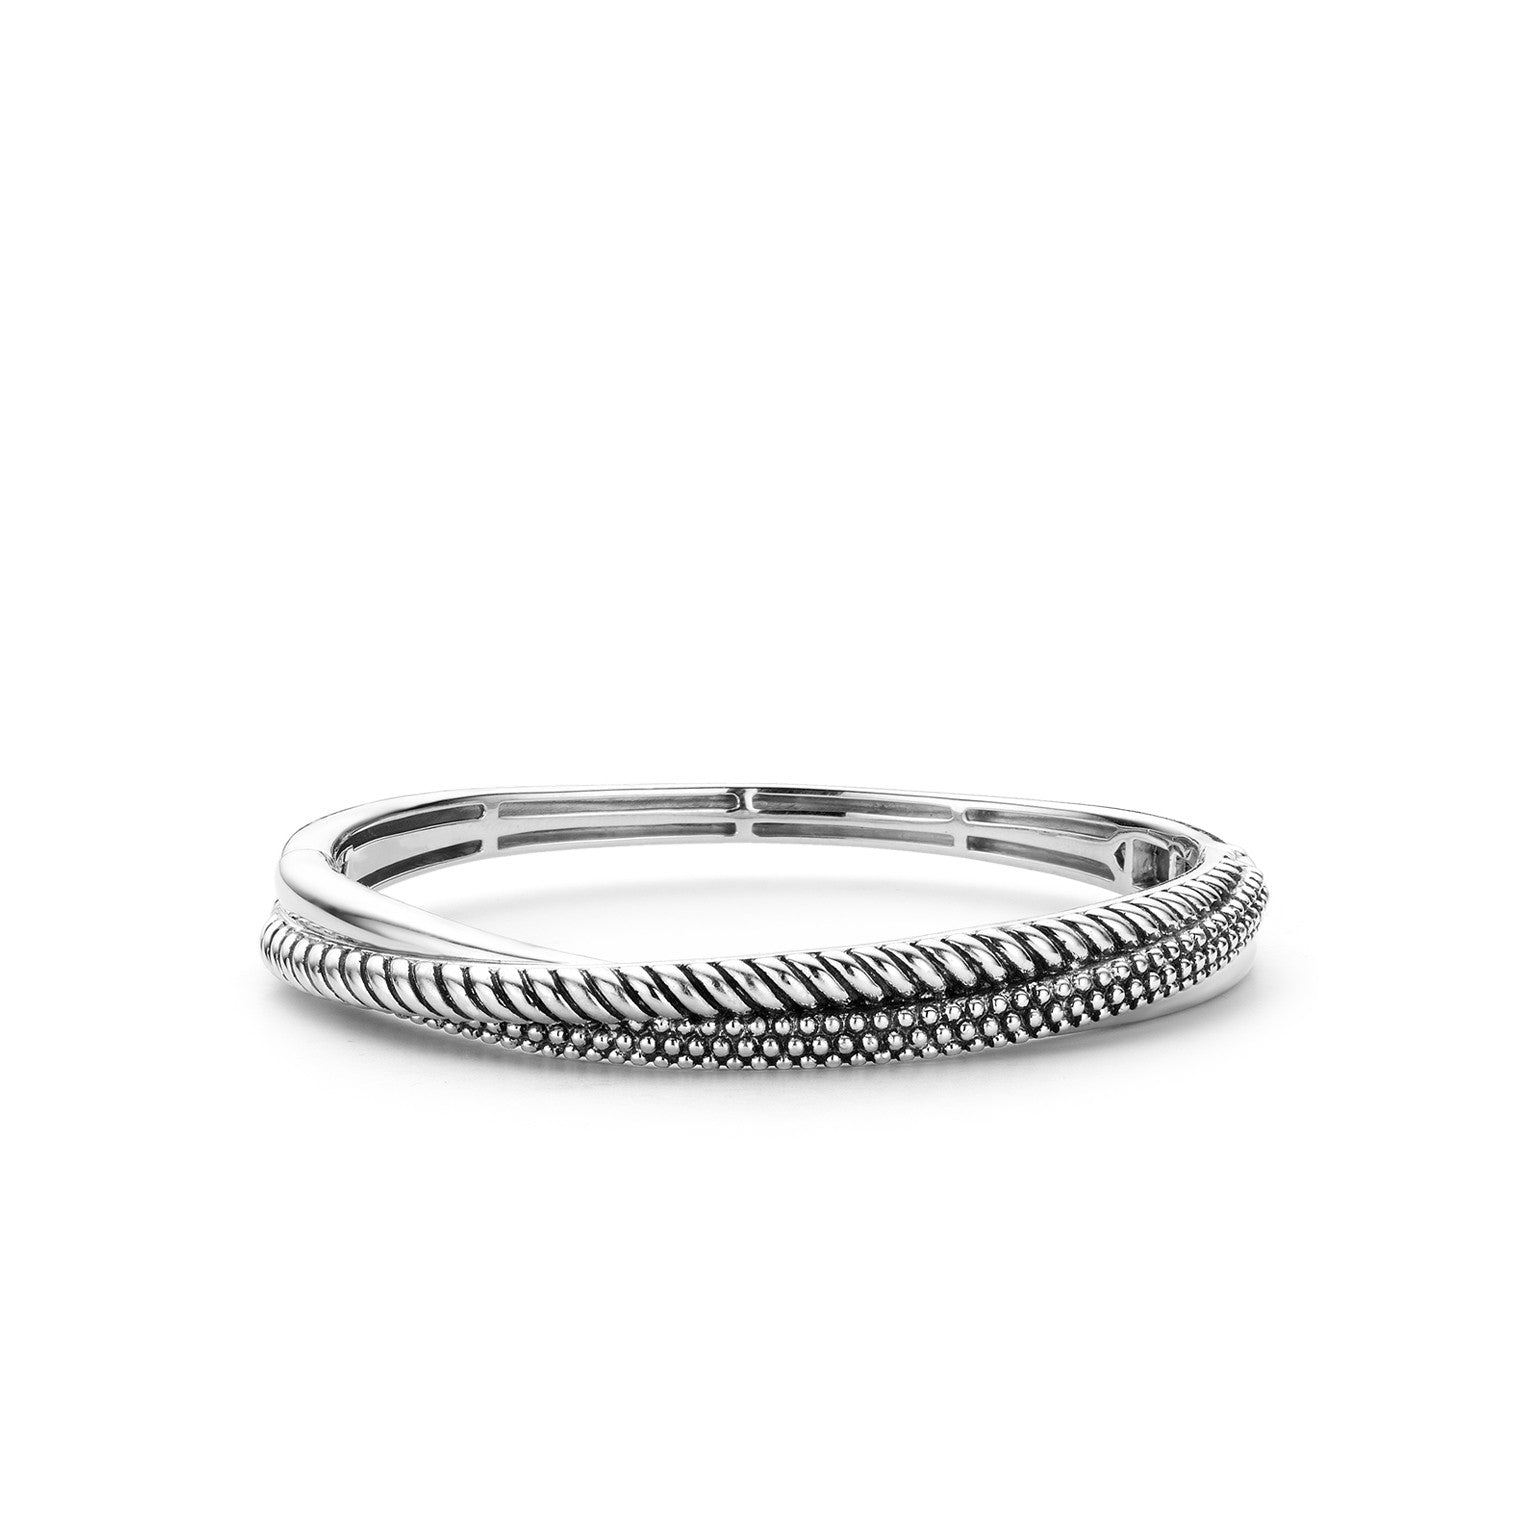 TI SENTO Sterling Silver Twisted Style Hinged Bracelet